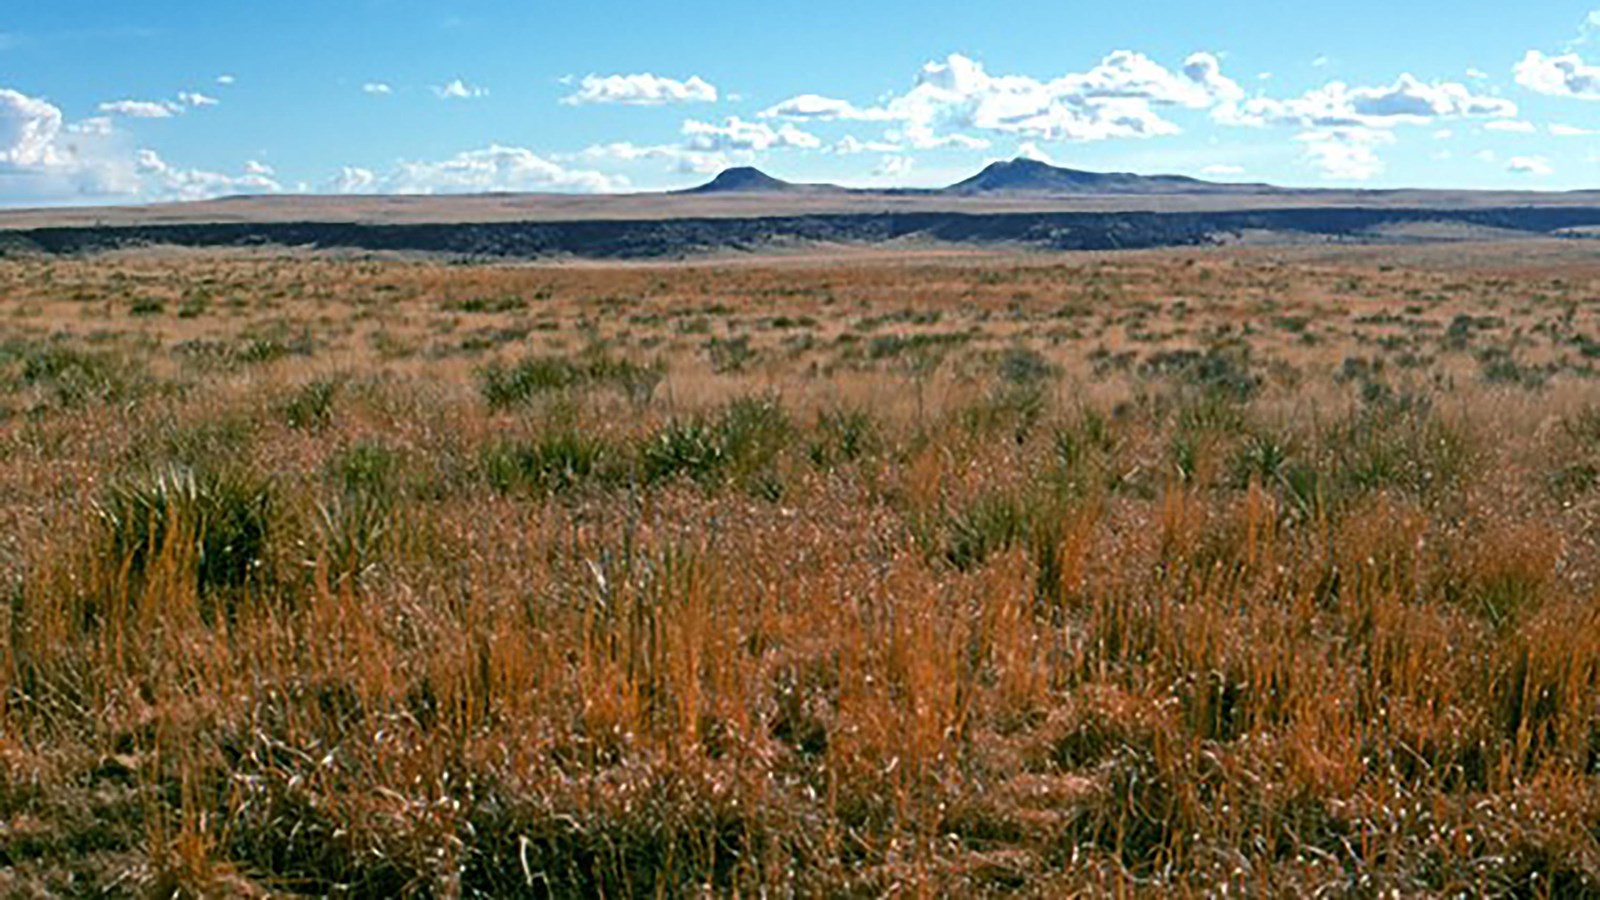 Expansive grassland looking out onto two distinct mounds.